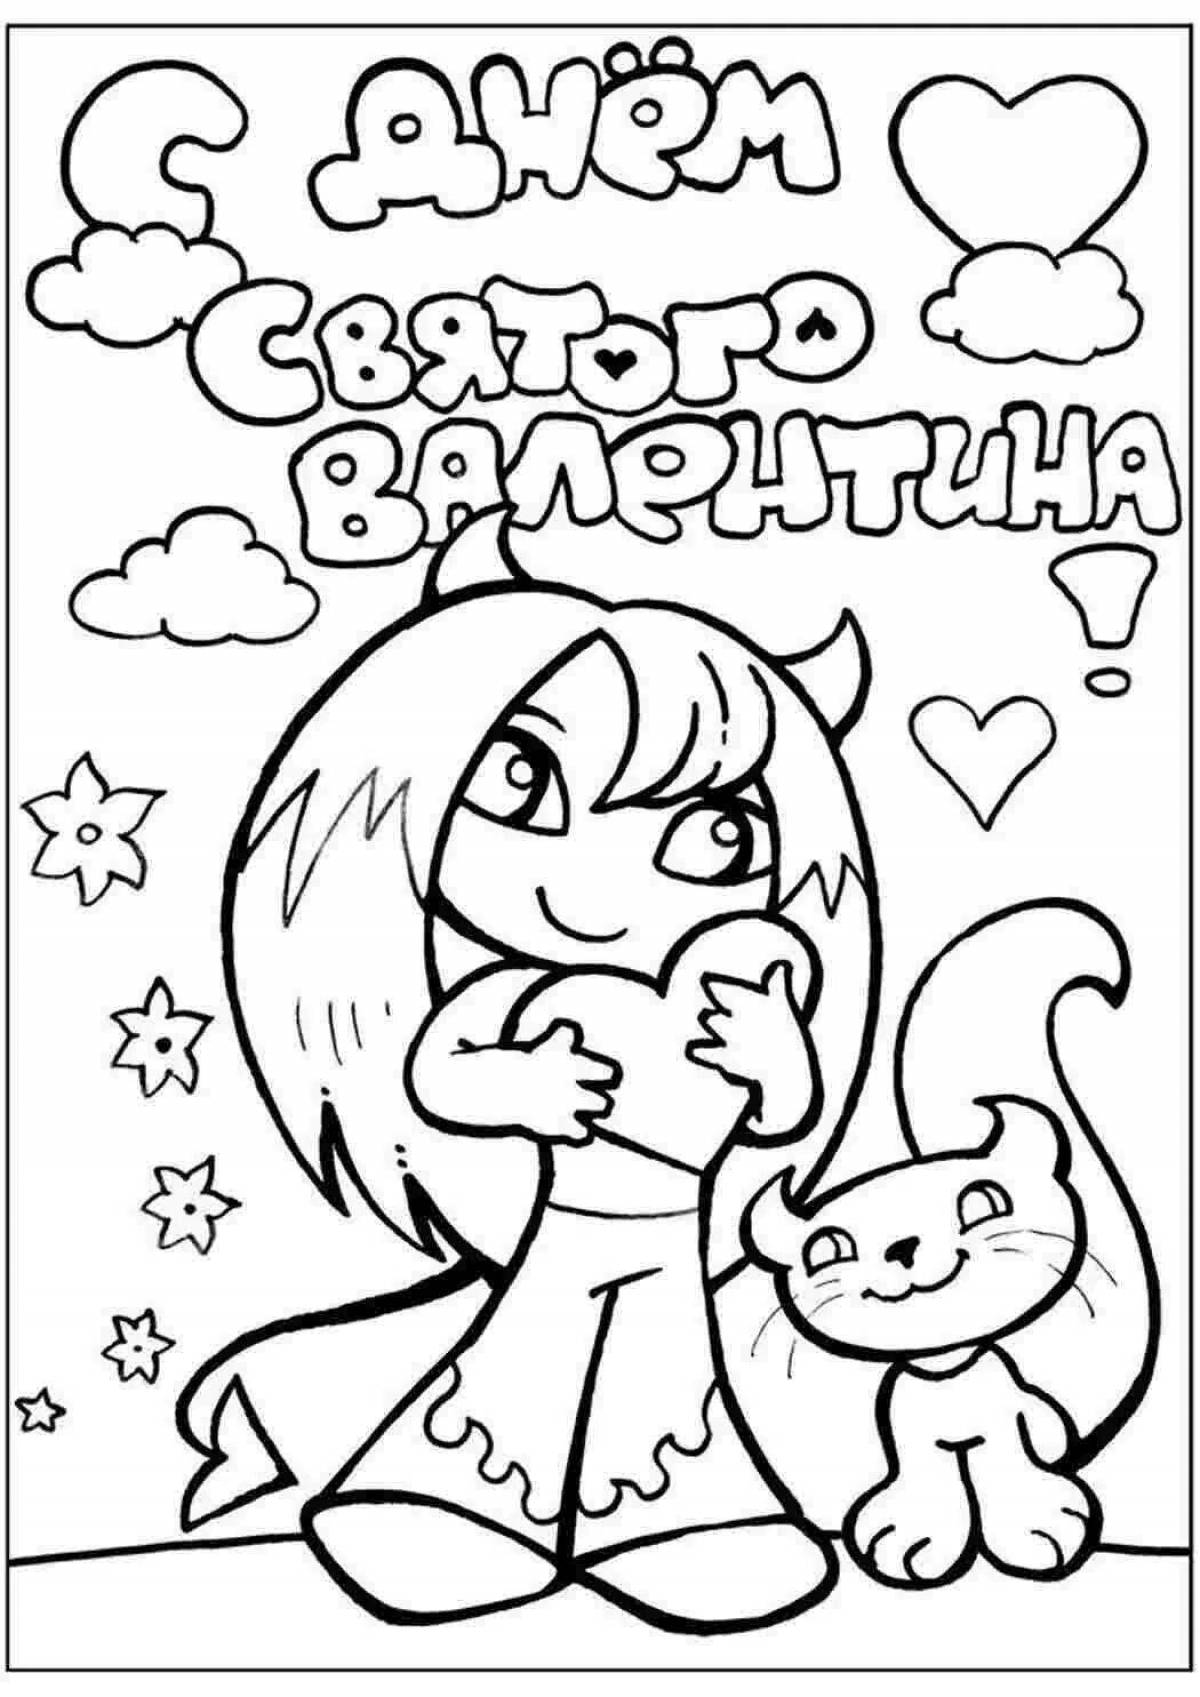 February 14 holiday coloring page